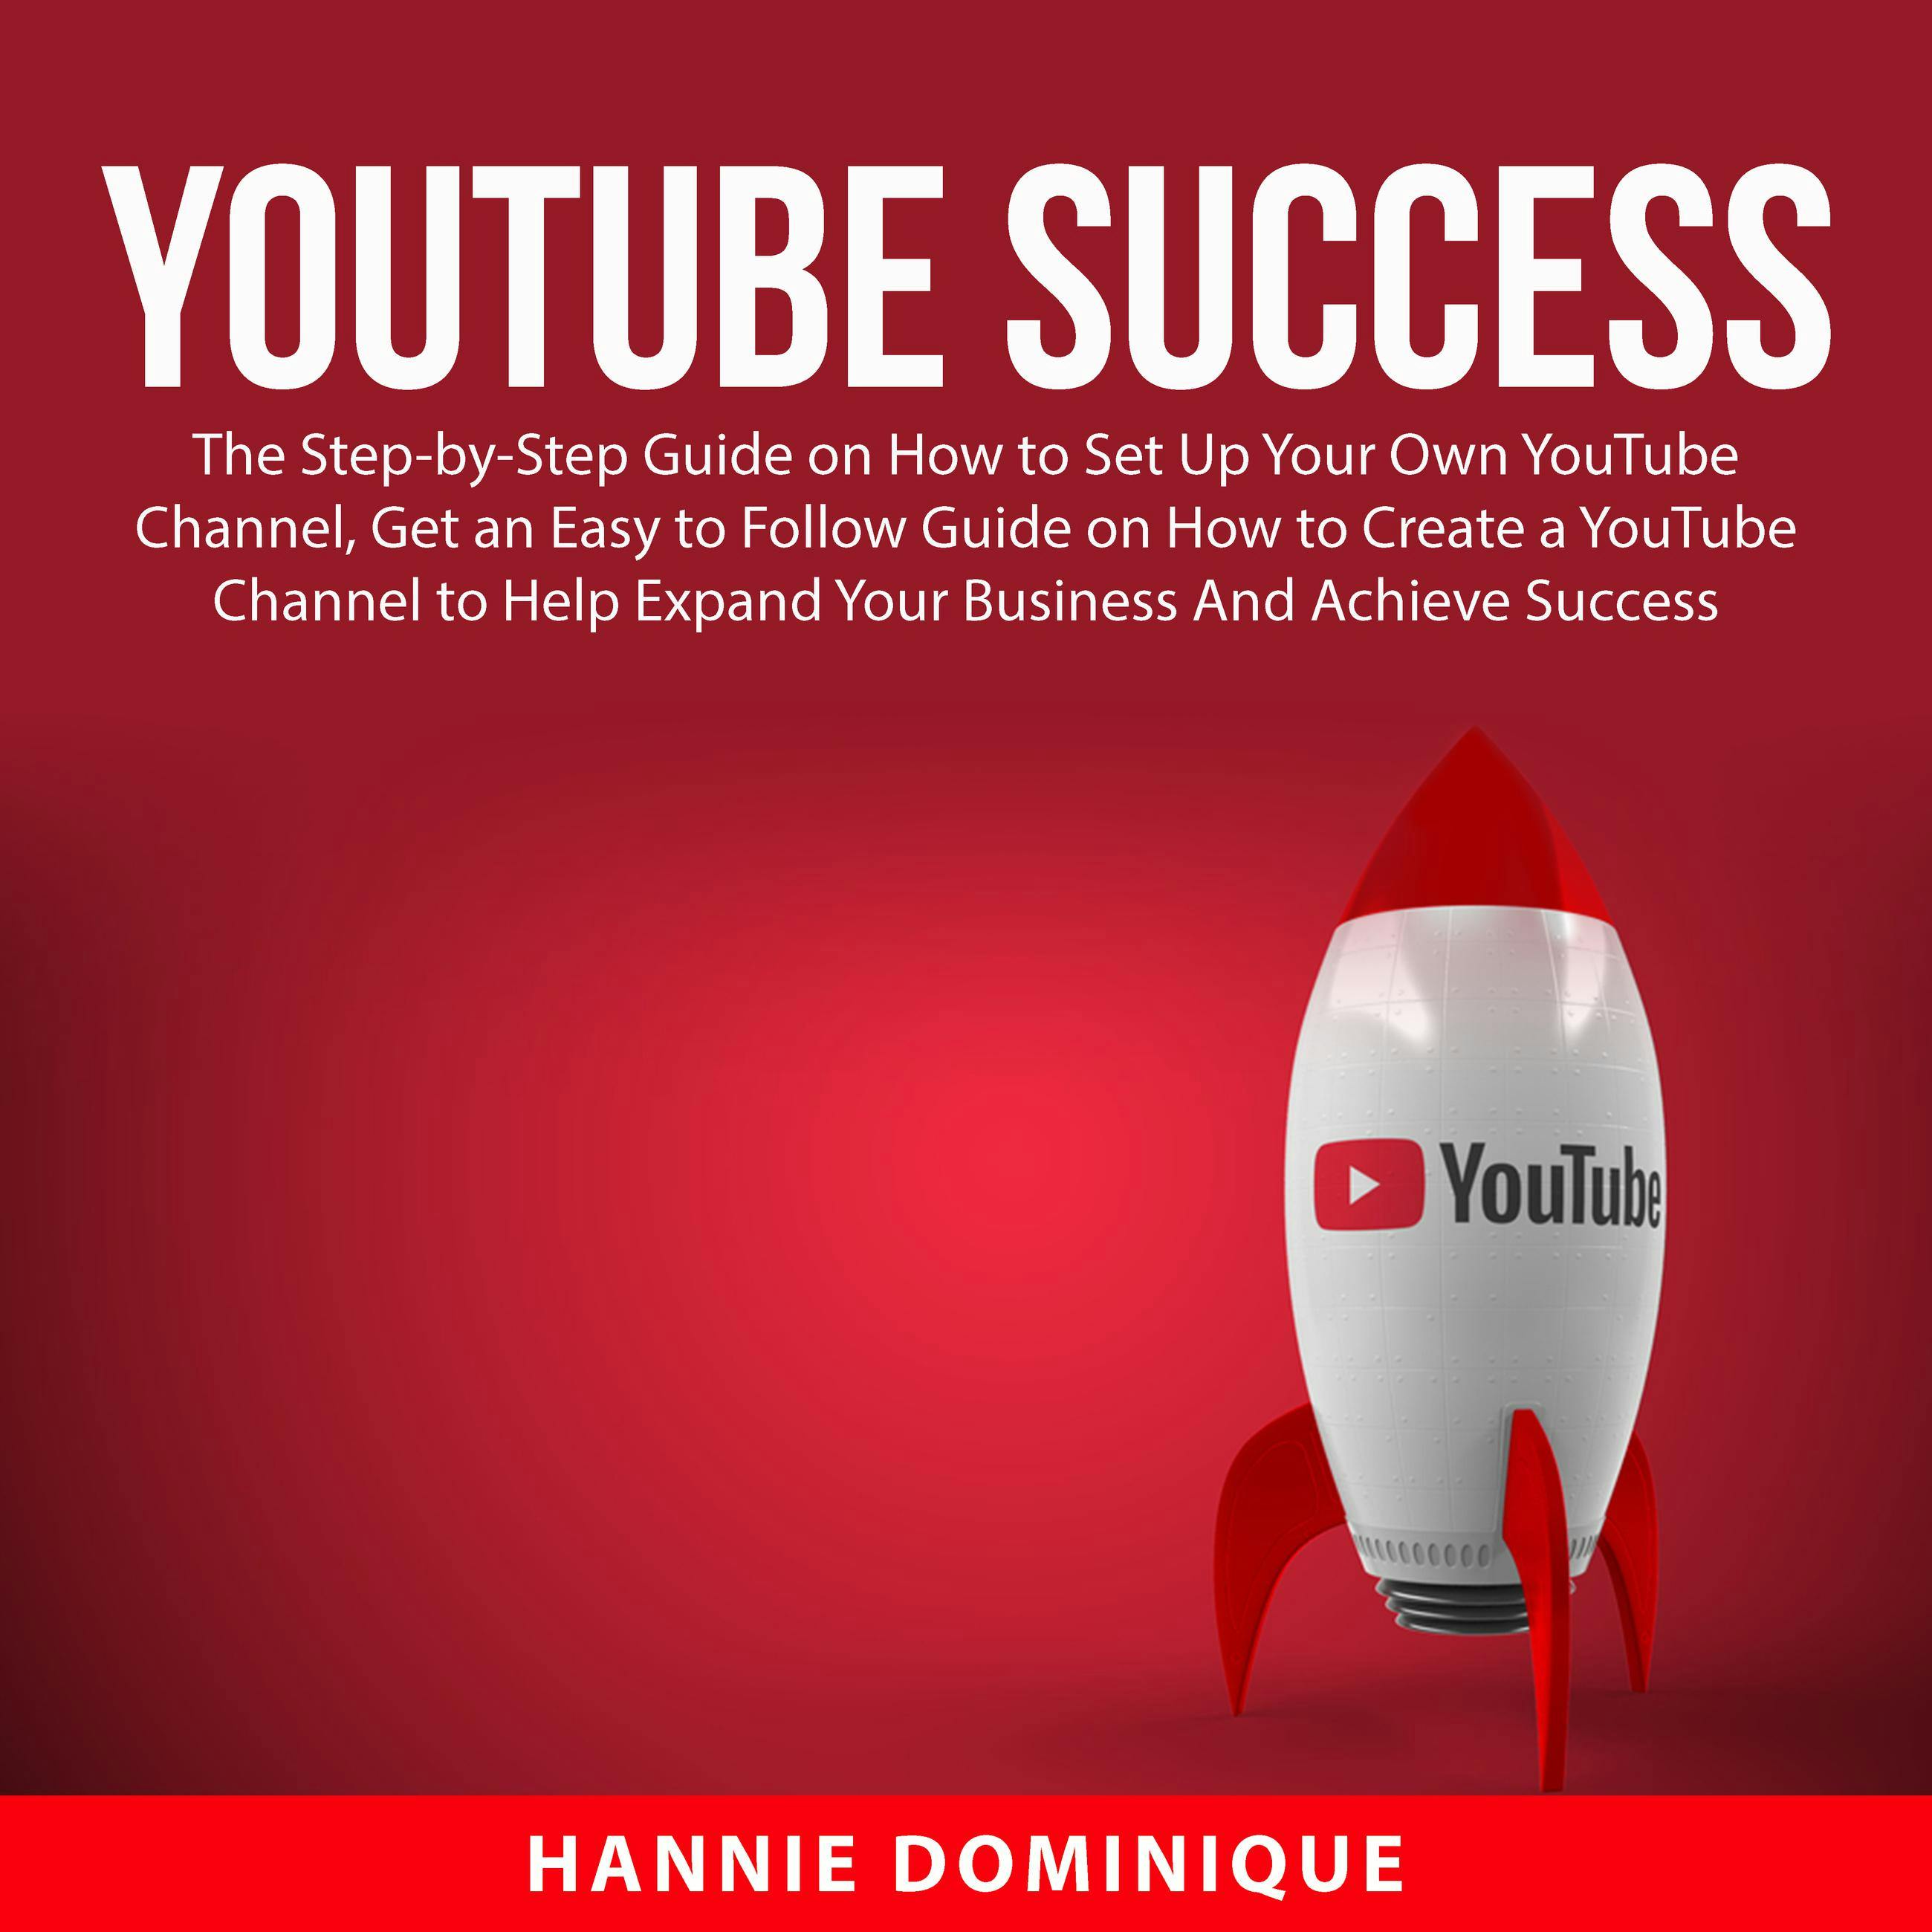 YouTube Success: The Step-by-Step Guide on How to Set Up Your Own YouTube Channel, Get an Easy to Follow Guide on How to Create a YouTube Channel to Help Expand Your Business And Achieve Success - Hannie Dominique